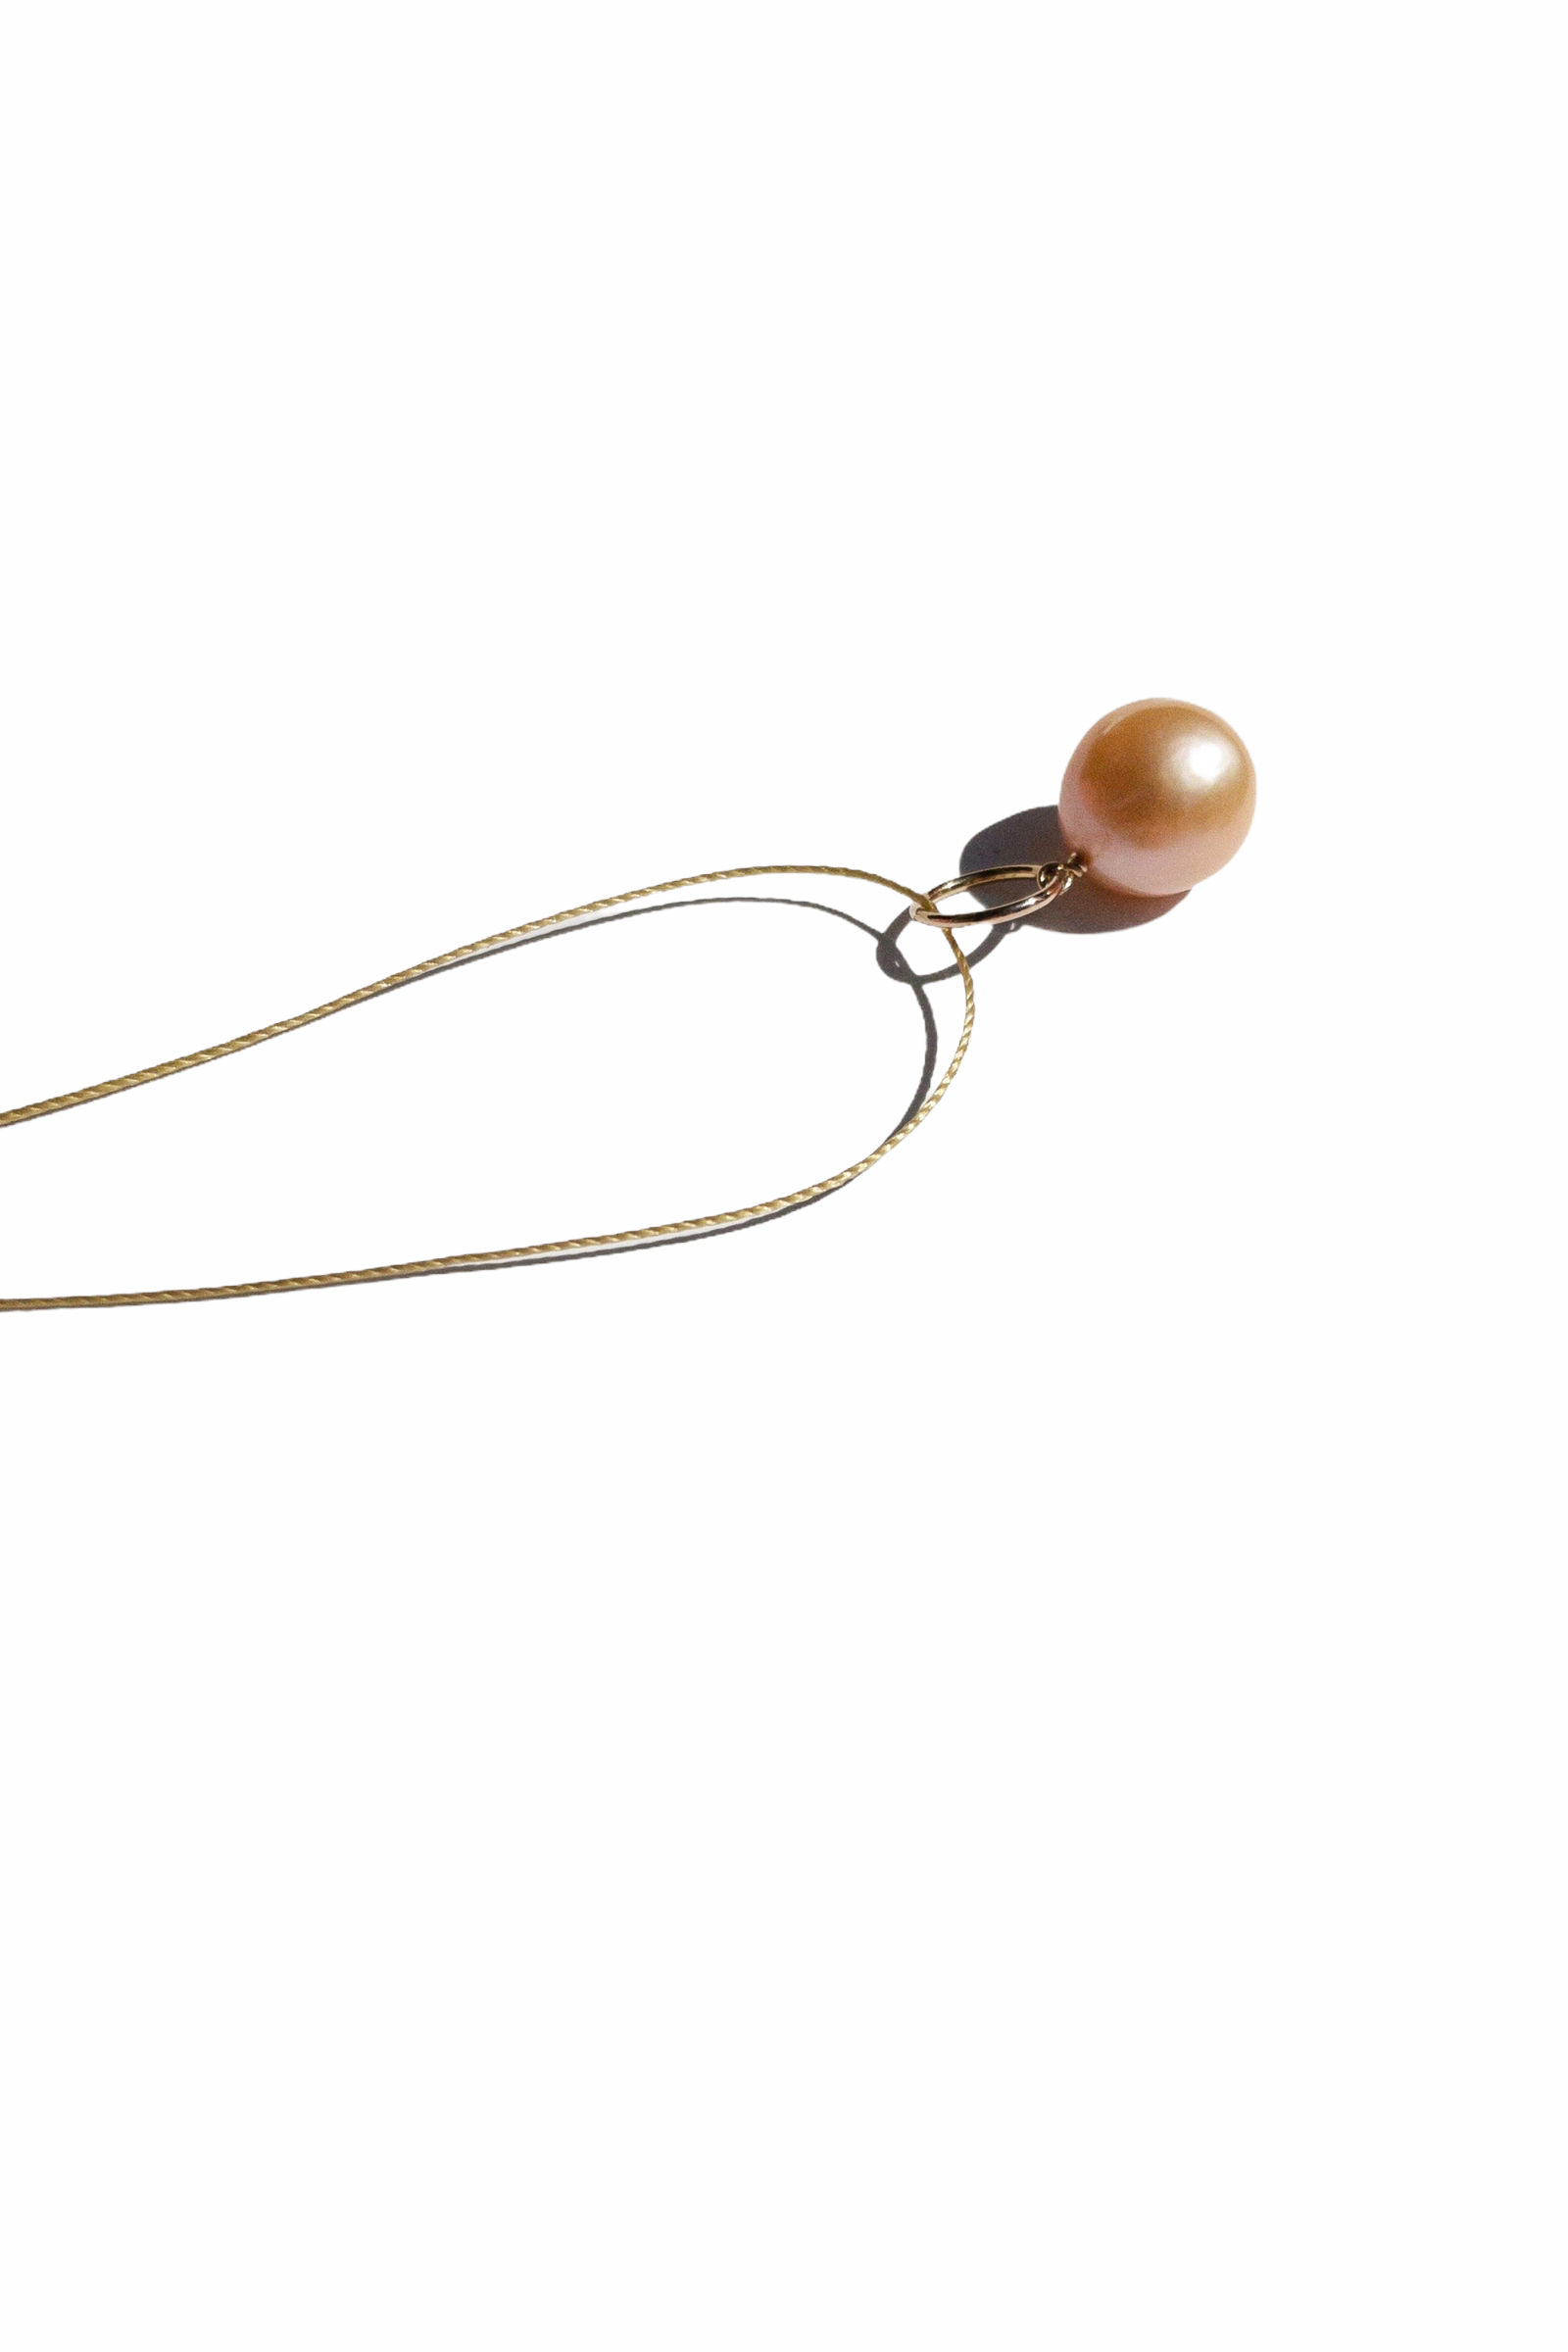 Stellar Necklace with Freshwater Baroque Pearl on Nylon String